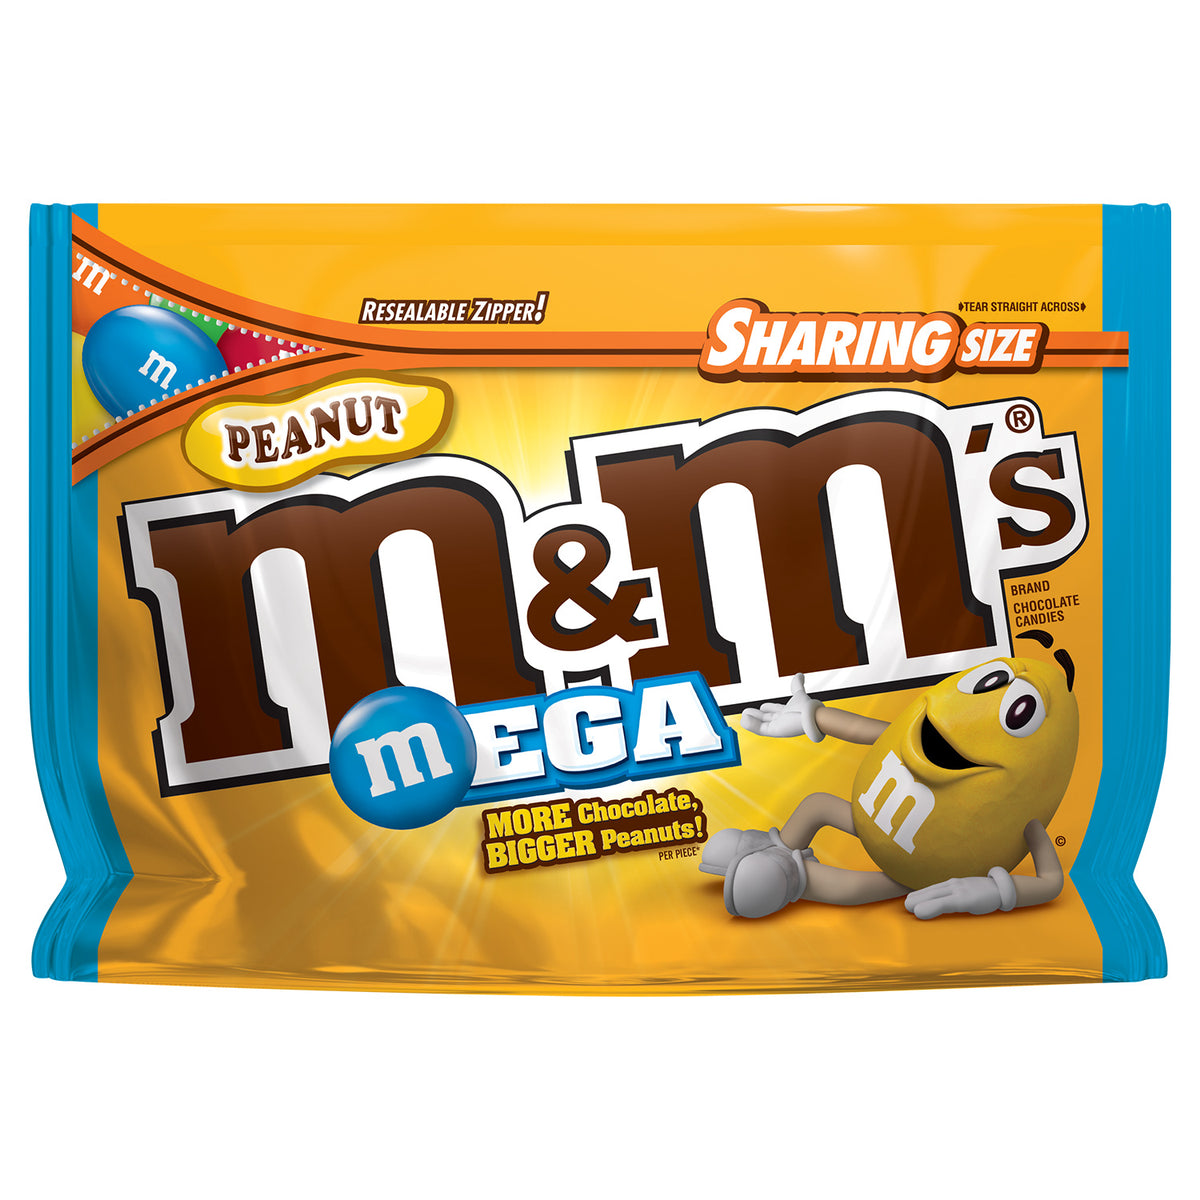 M&M'S Peanut Butter Chocolate Candy Sharing Size 9.6-Ounce Bag